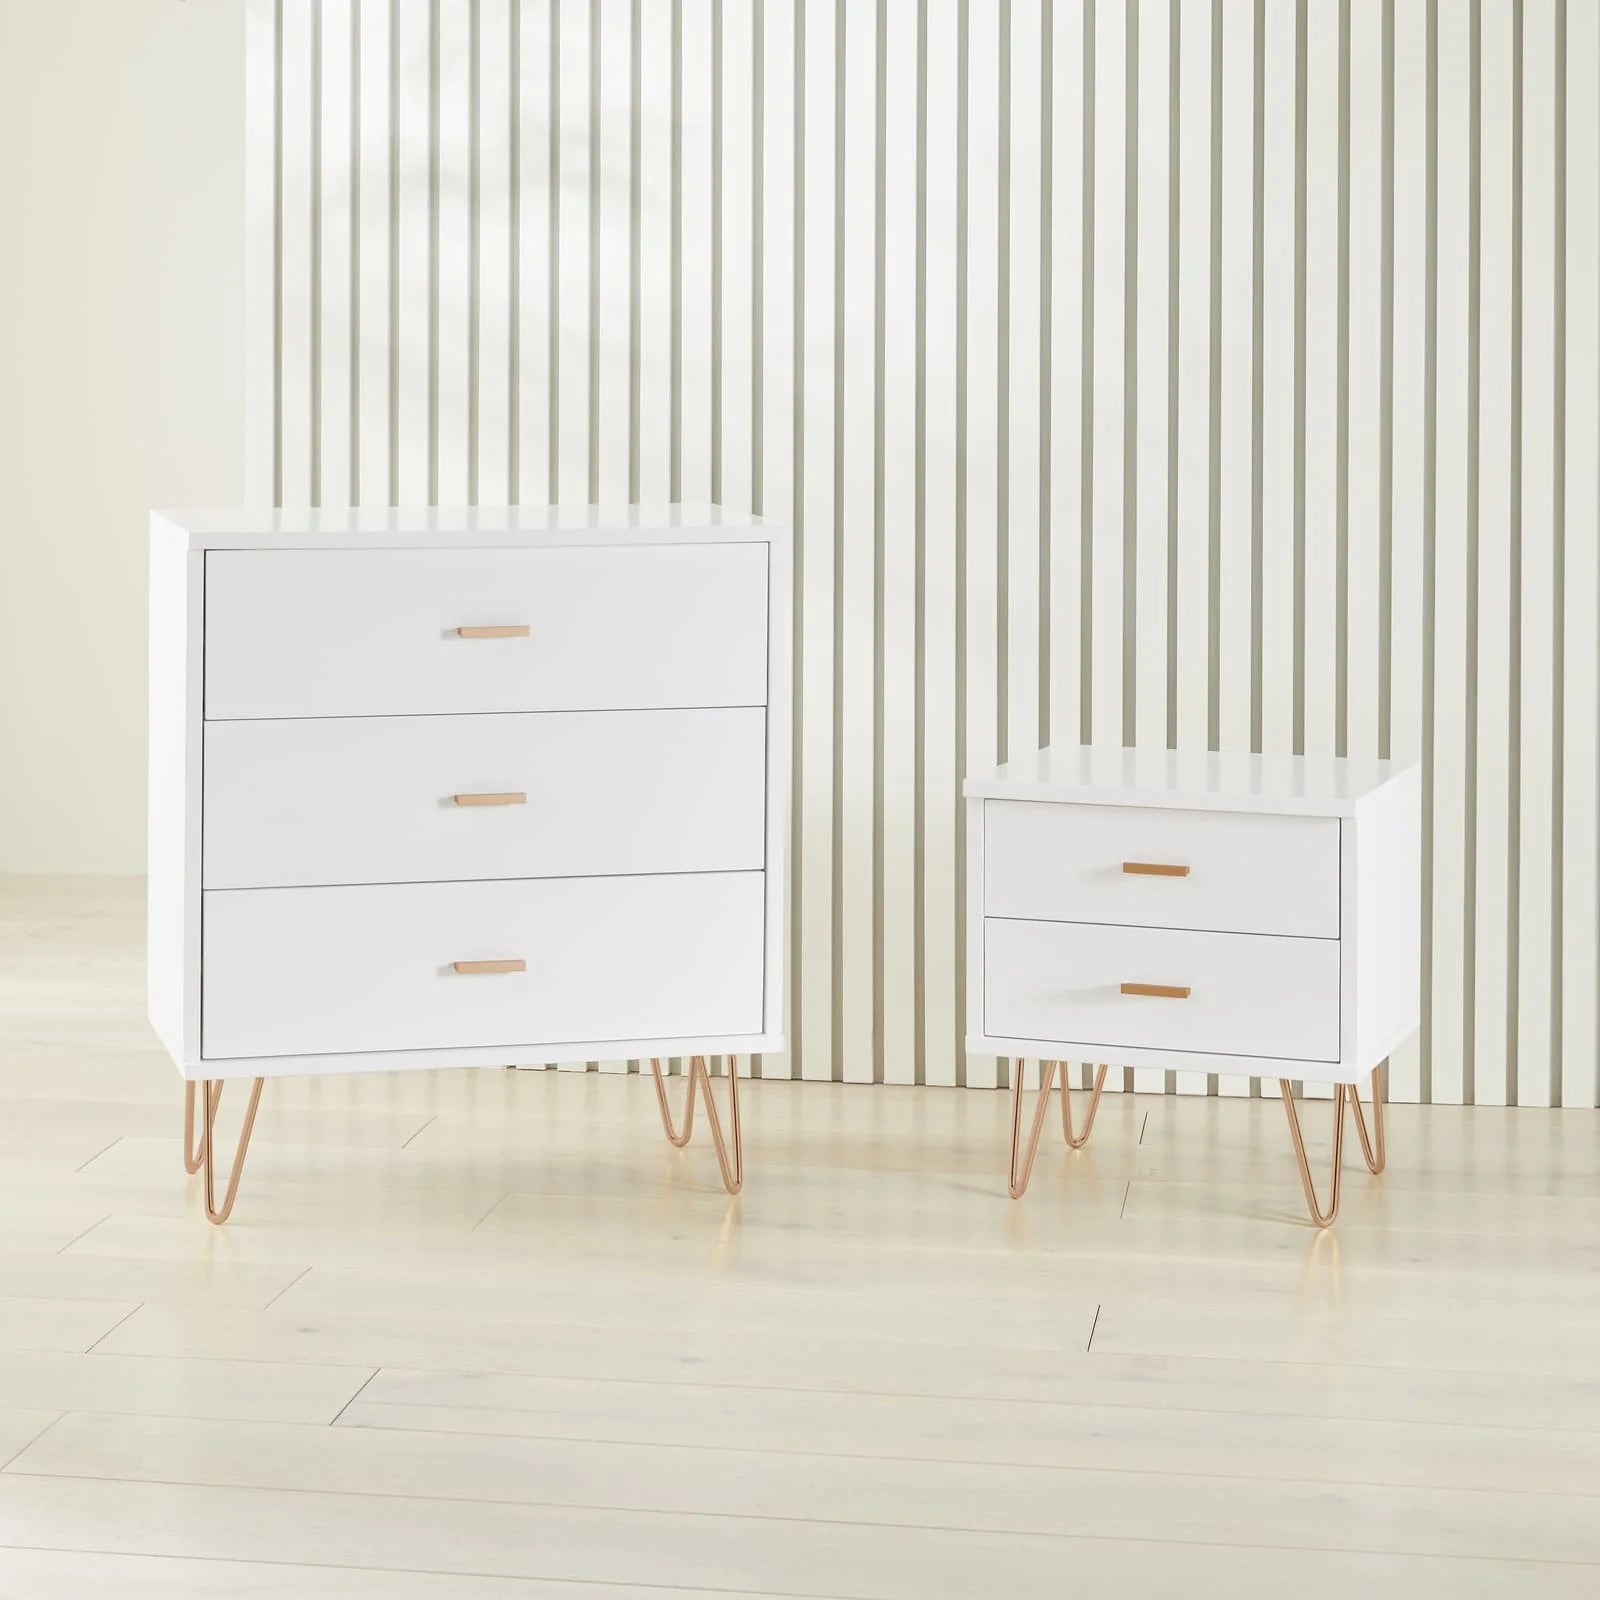 Monroe white painted solid wood bedside table with 2 drawers and metal hardware | malletandplane.com